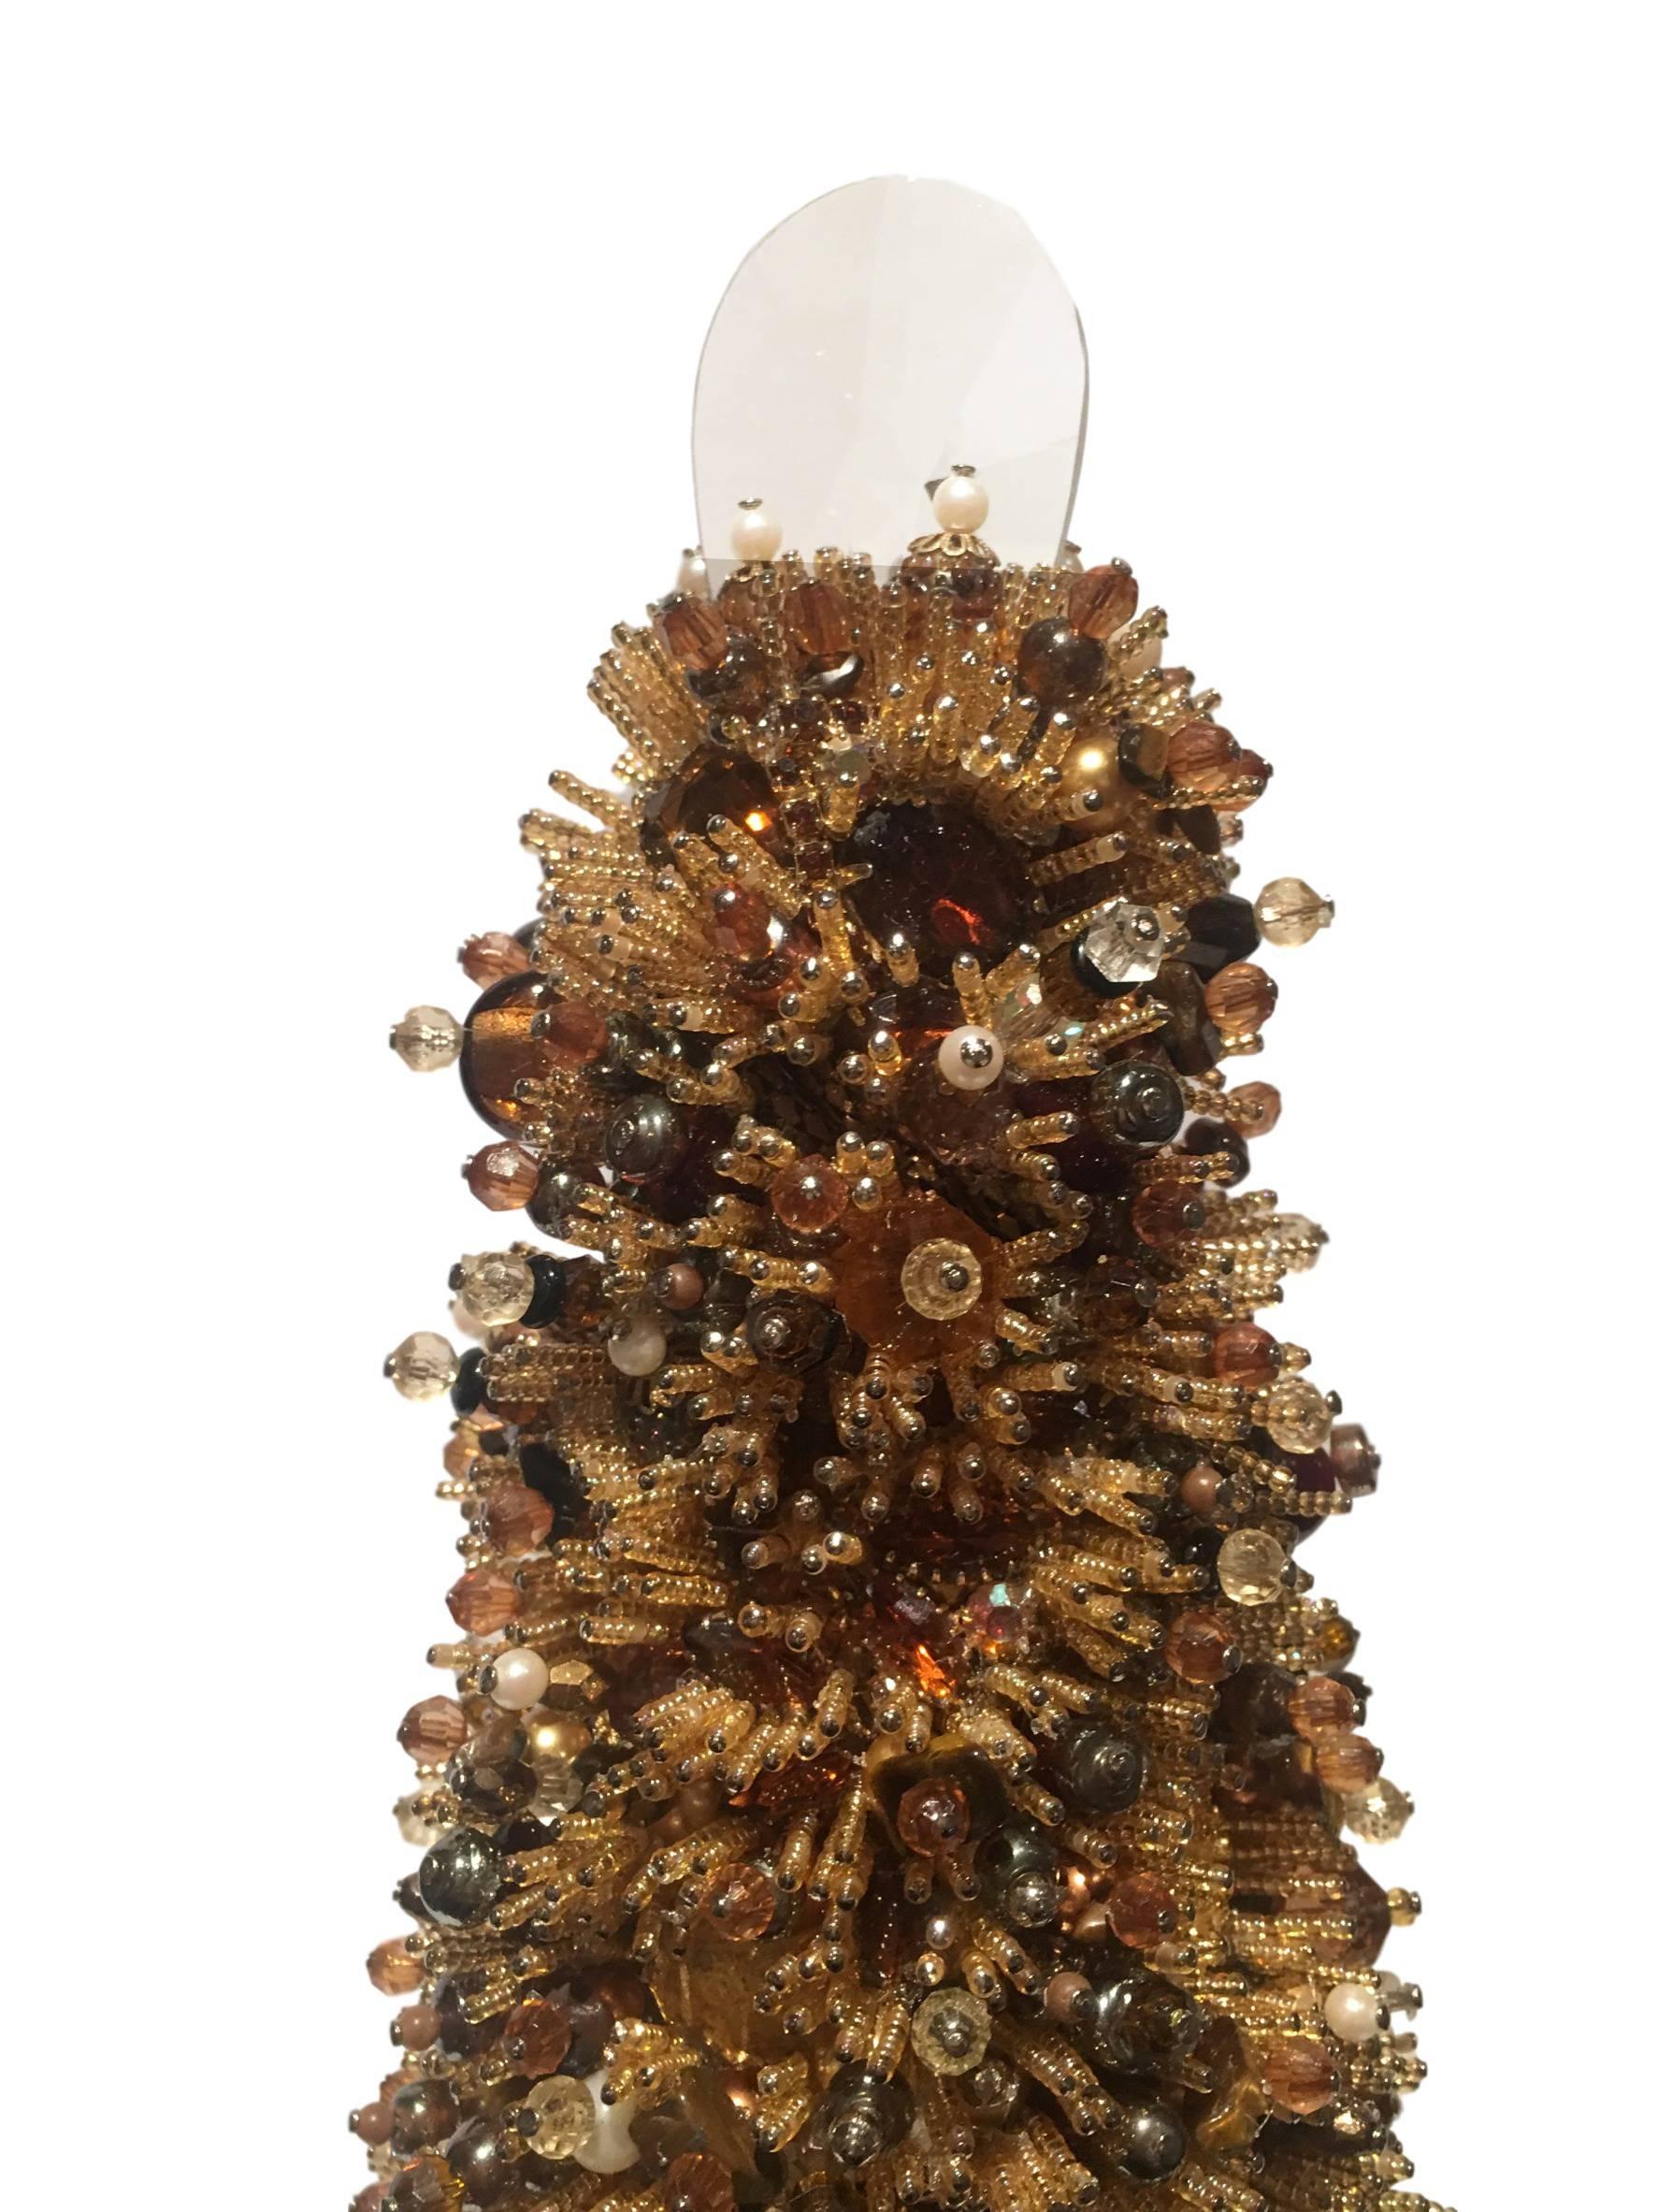 Extra large handmade beaded sculpture by Peyton Hayslip.

These one-of-a-kind pieces are true works of art with each sculpture containing antique, vintage and precious jewels, brooches, pearls and seed beads.